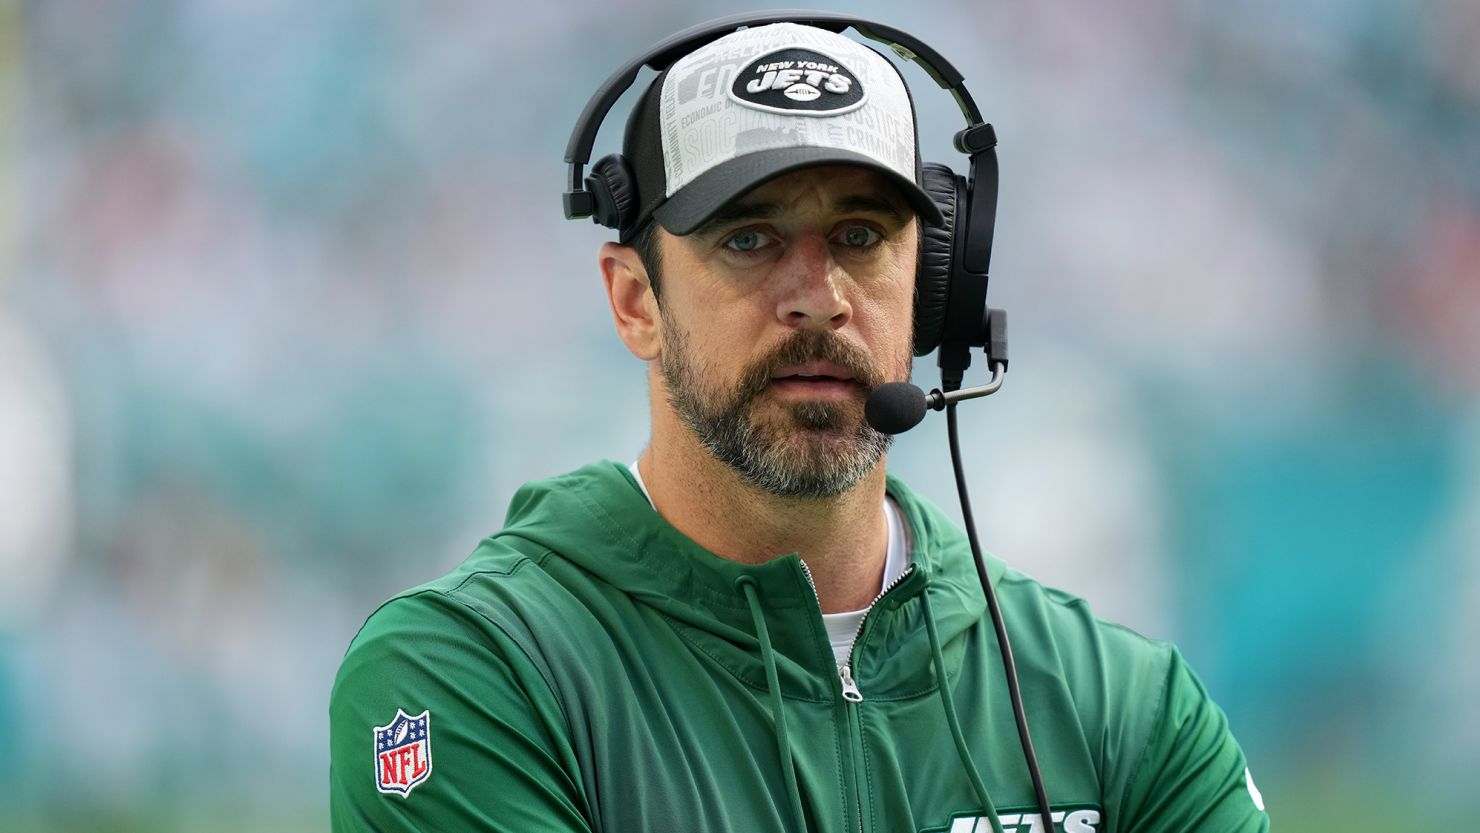 Aaron Rodgers and the Jets: A Mission to Revamp for Super Bowl Glory